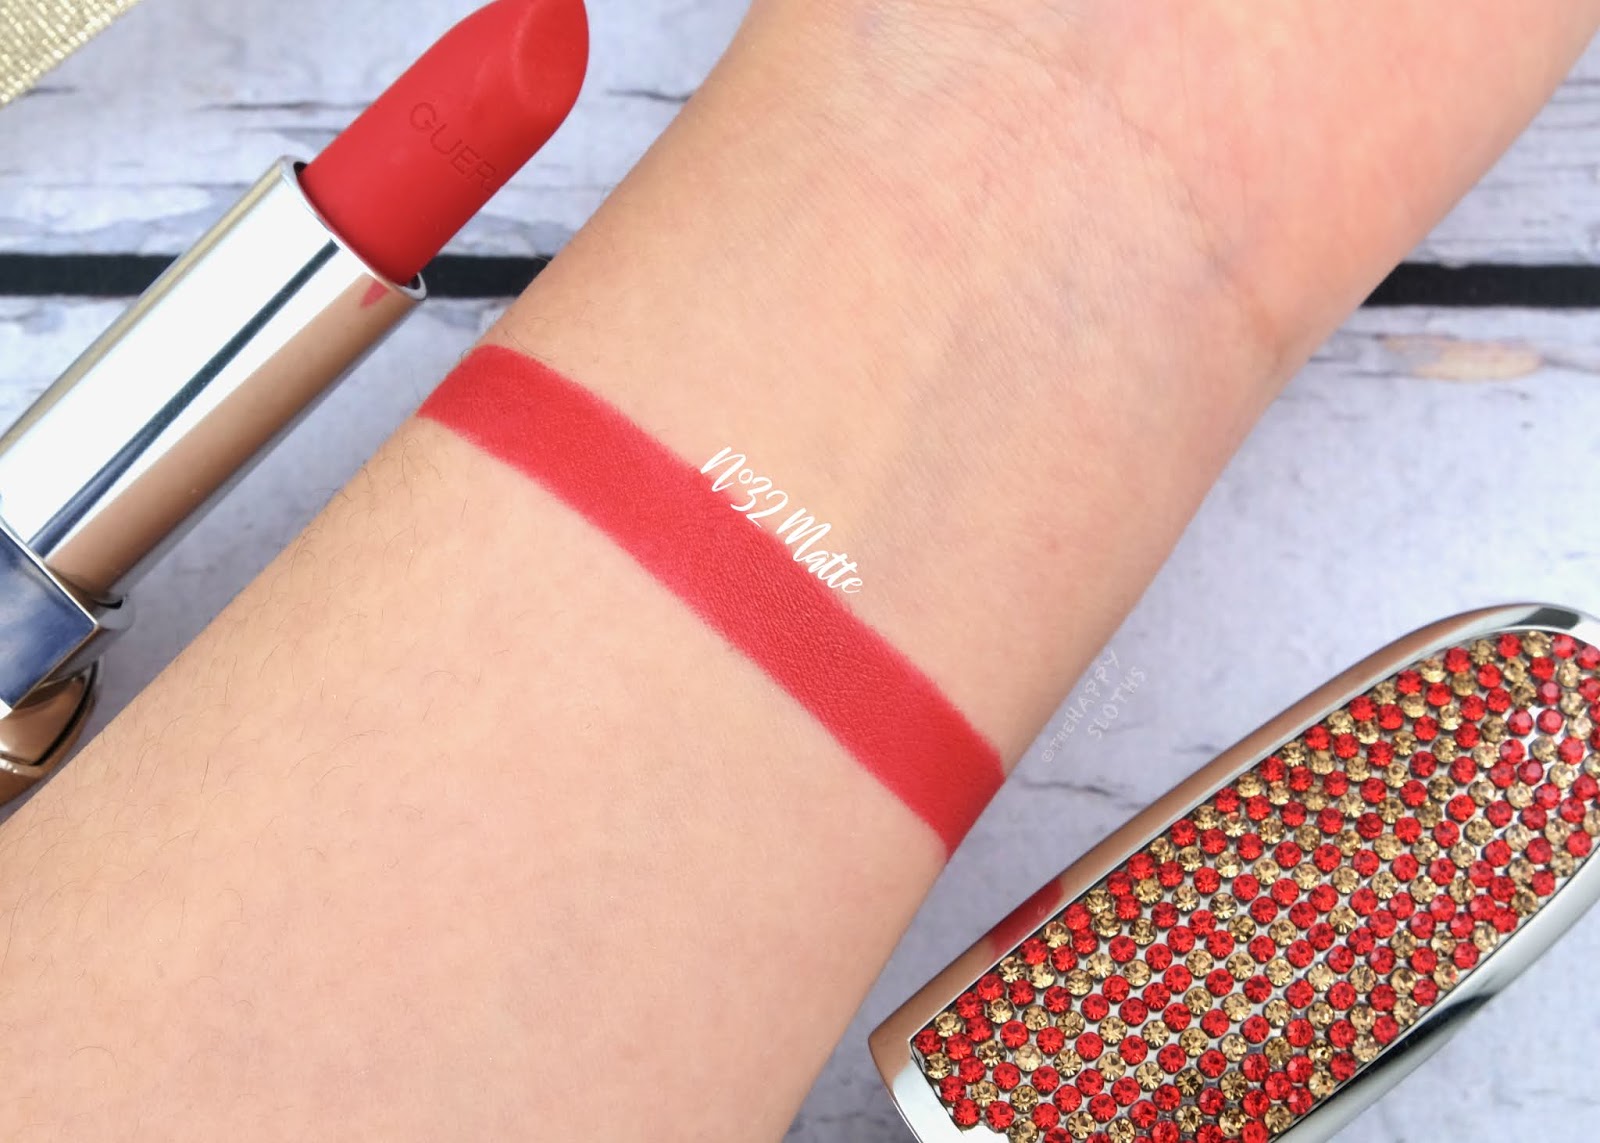 Guerlain | Holiday 2020 Golden Bee Rouge G Lipstick in "N°32 Matte": Review and Swatches